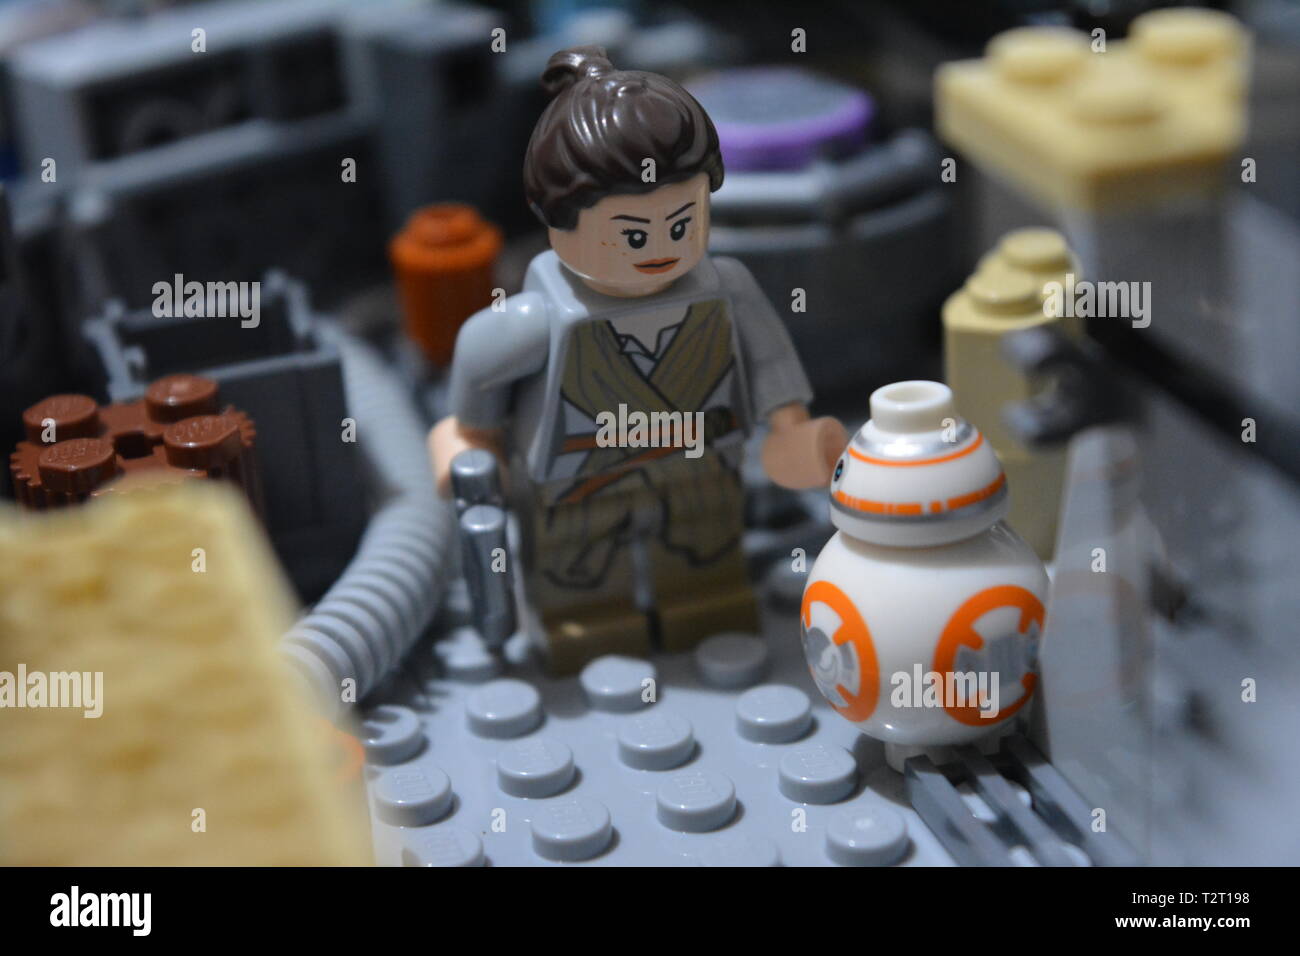 Star wars lego men hi-res stock photography and images - Alamy